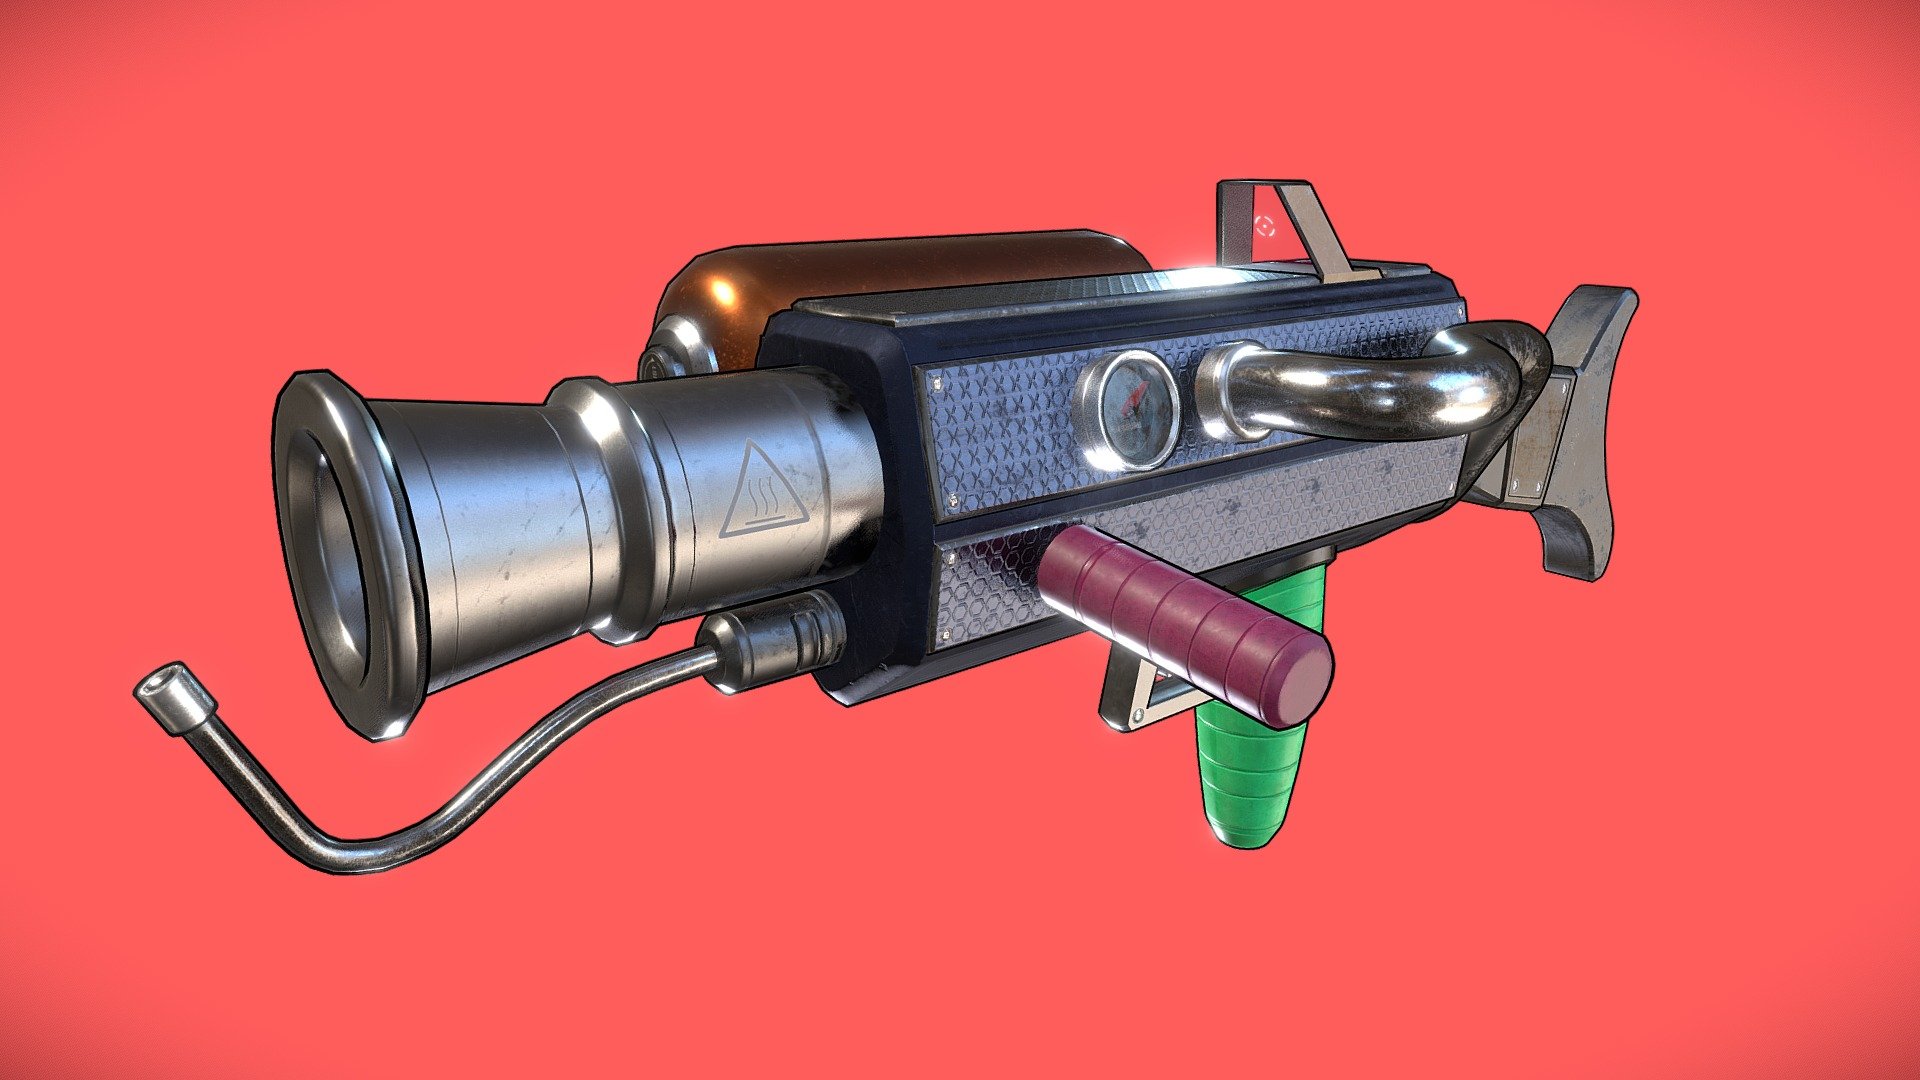 Game Ready Flamethrower model:

Flamethrower Triangle Count - 7040 | Cell Shade Model Triangle Count - 7040 | Textures - 4k - Flamethrower - GameReady - 3D model by brandonhoyle 3d model